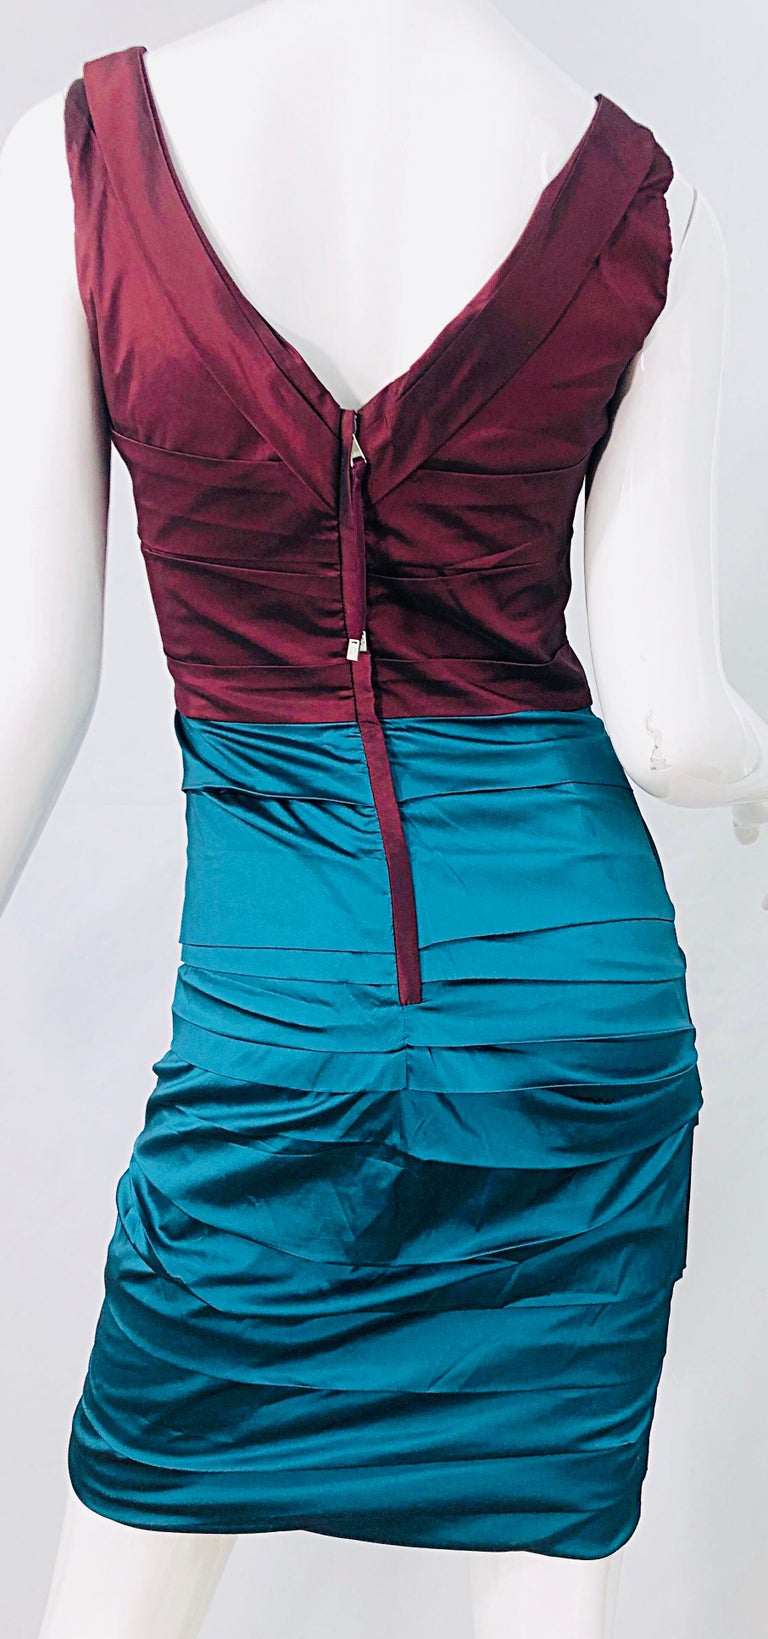 NWT Dolce and Gabbana 1990s Burgundy Turquoise Blue Colorblock Vintage Dress For Sale 6